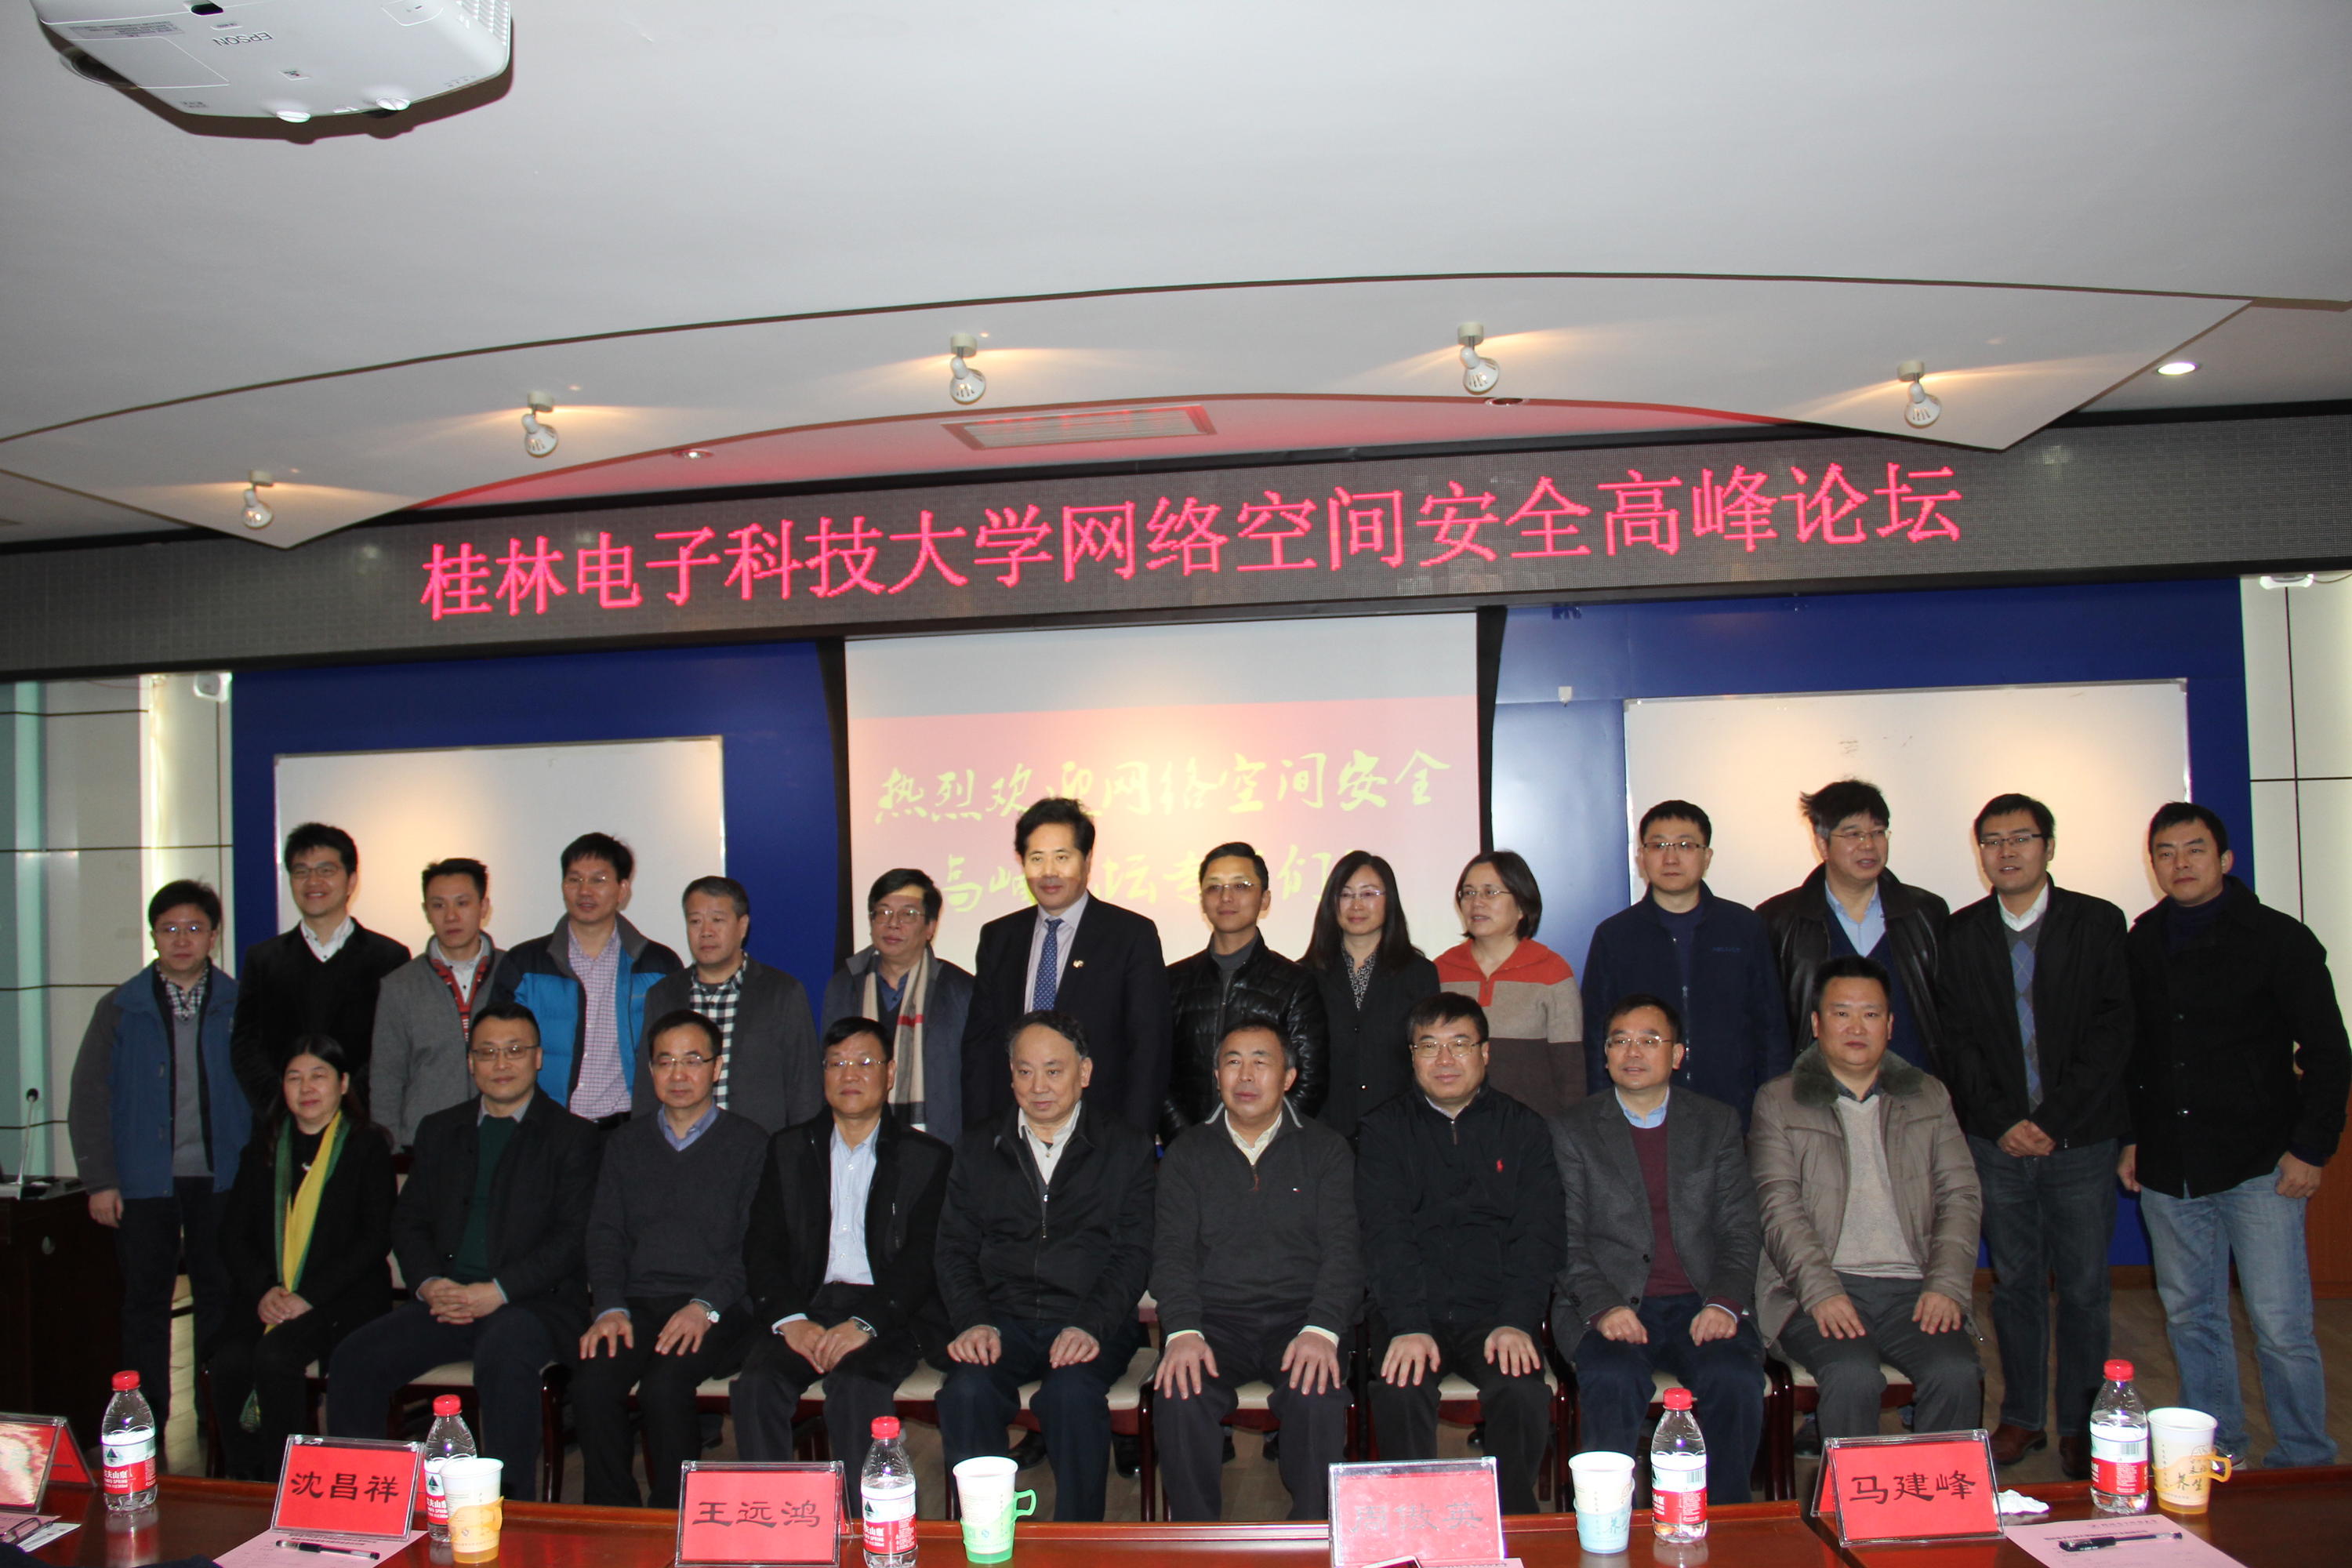 Professor Shen, Profesoor Changxiang Shen, and our former BBCR members attended the Guilin University of Electronic Technology Cyber Security Forum in Guilin, China